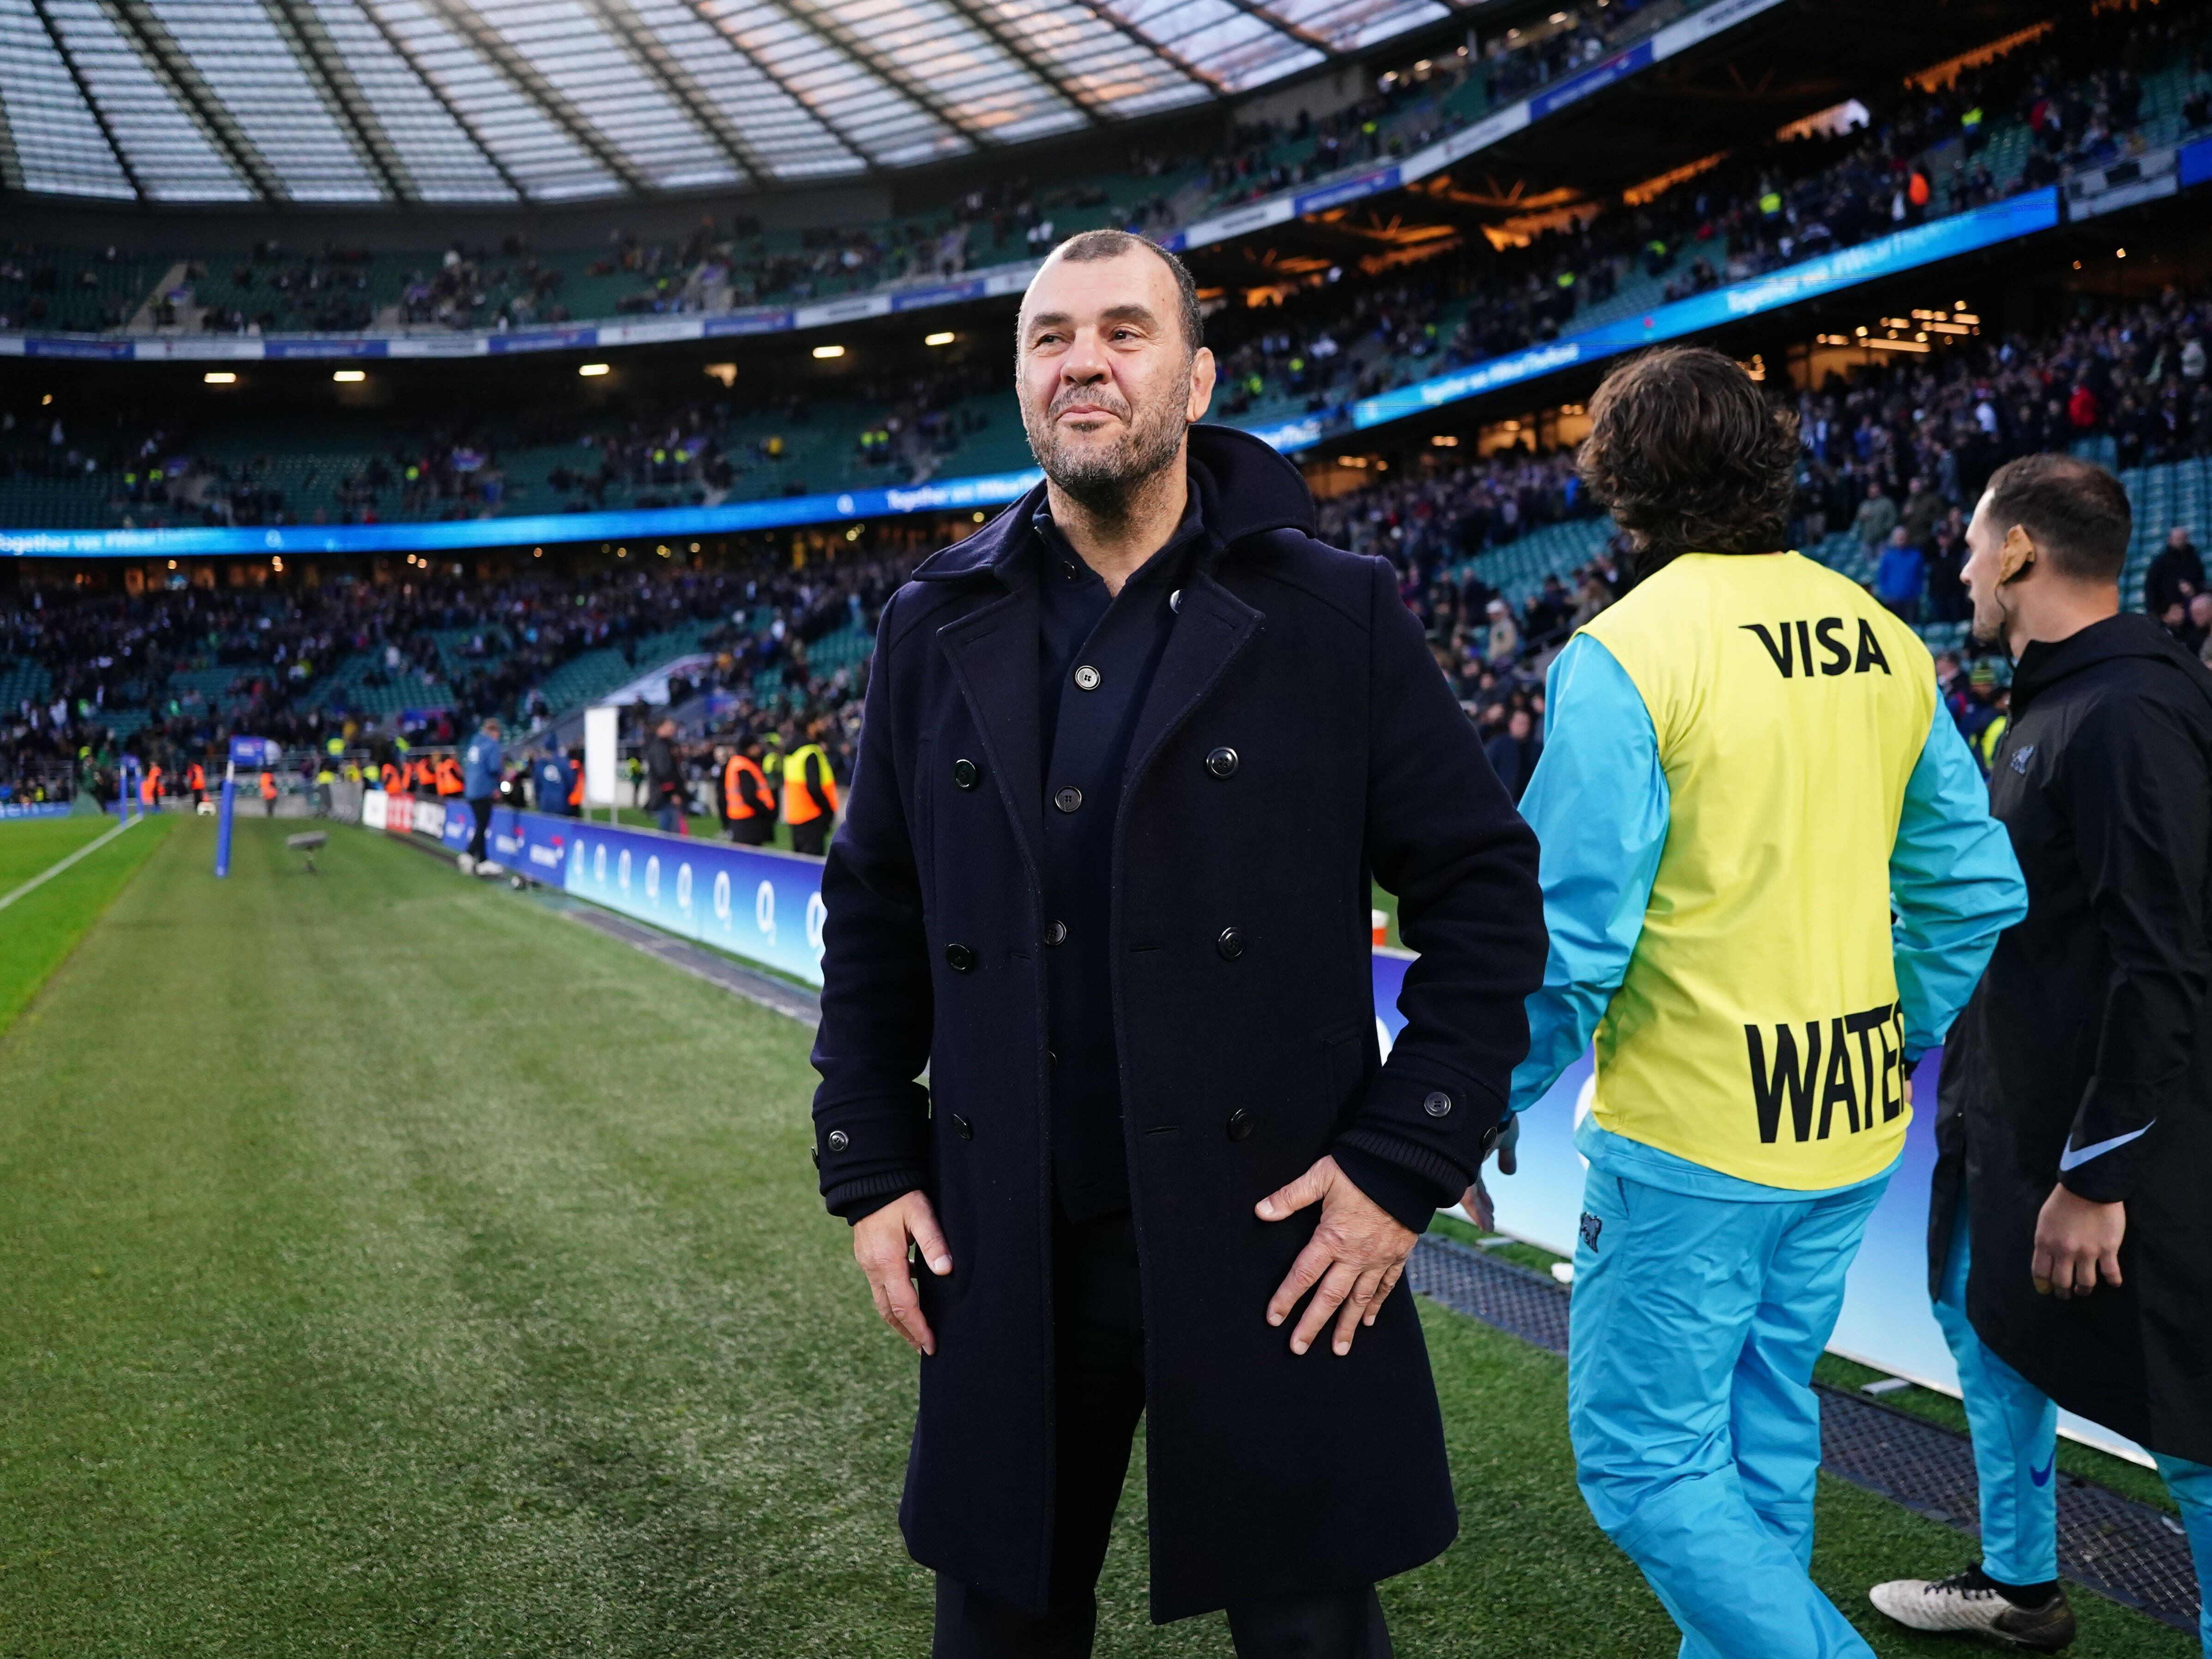 Argentina are underdogs against Wales – Michael Cheika